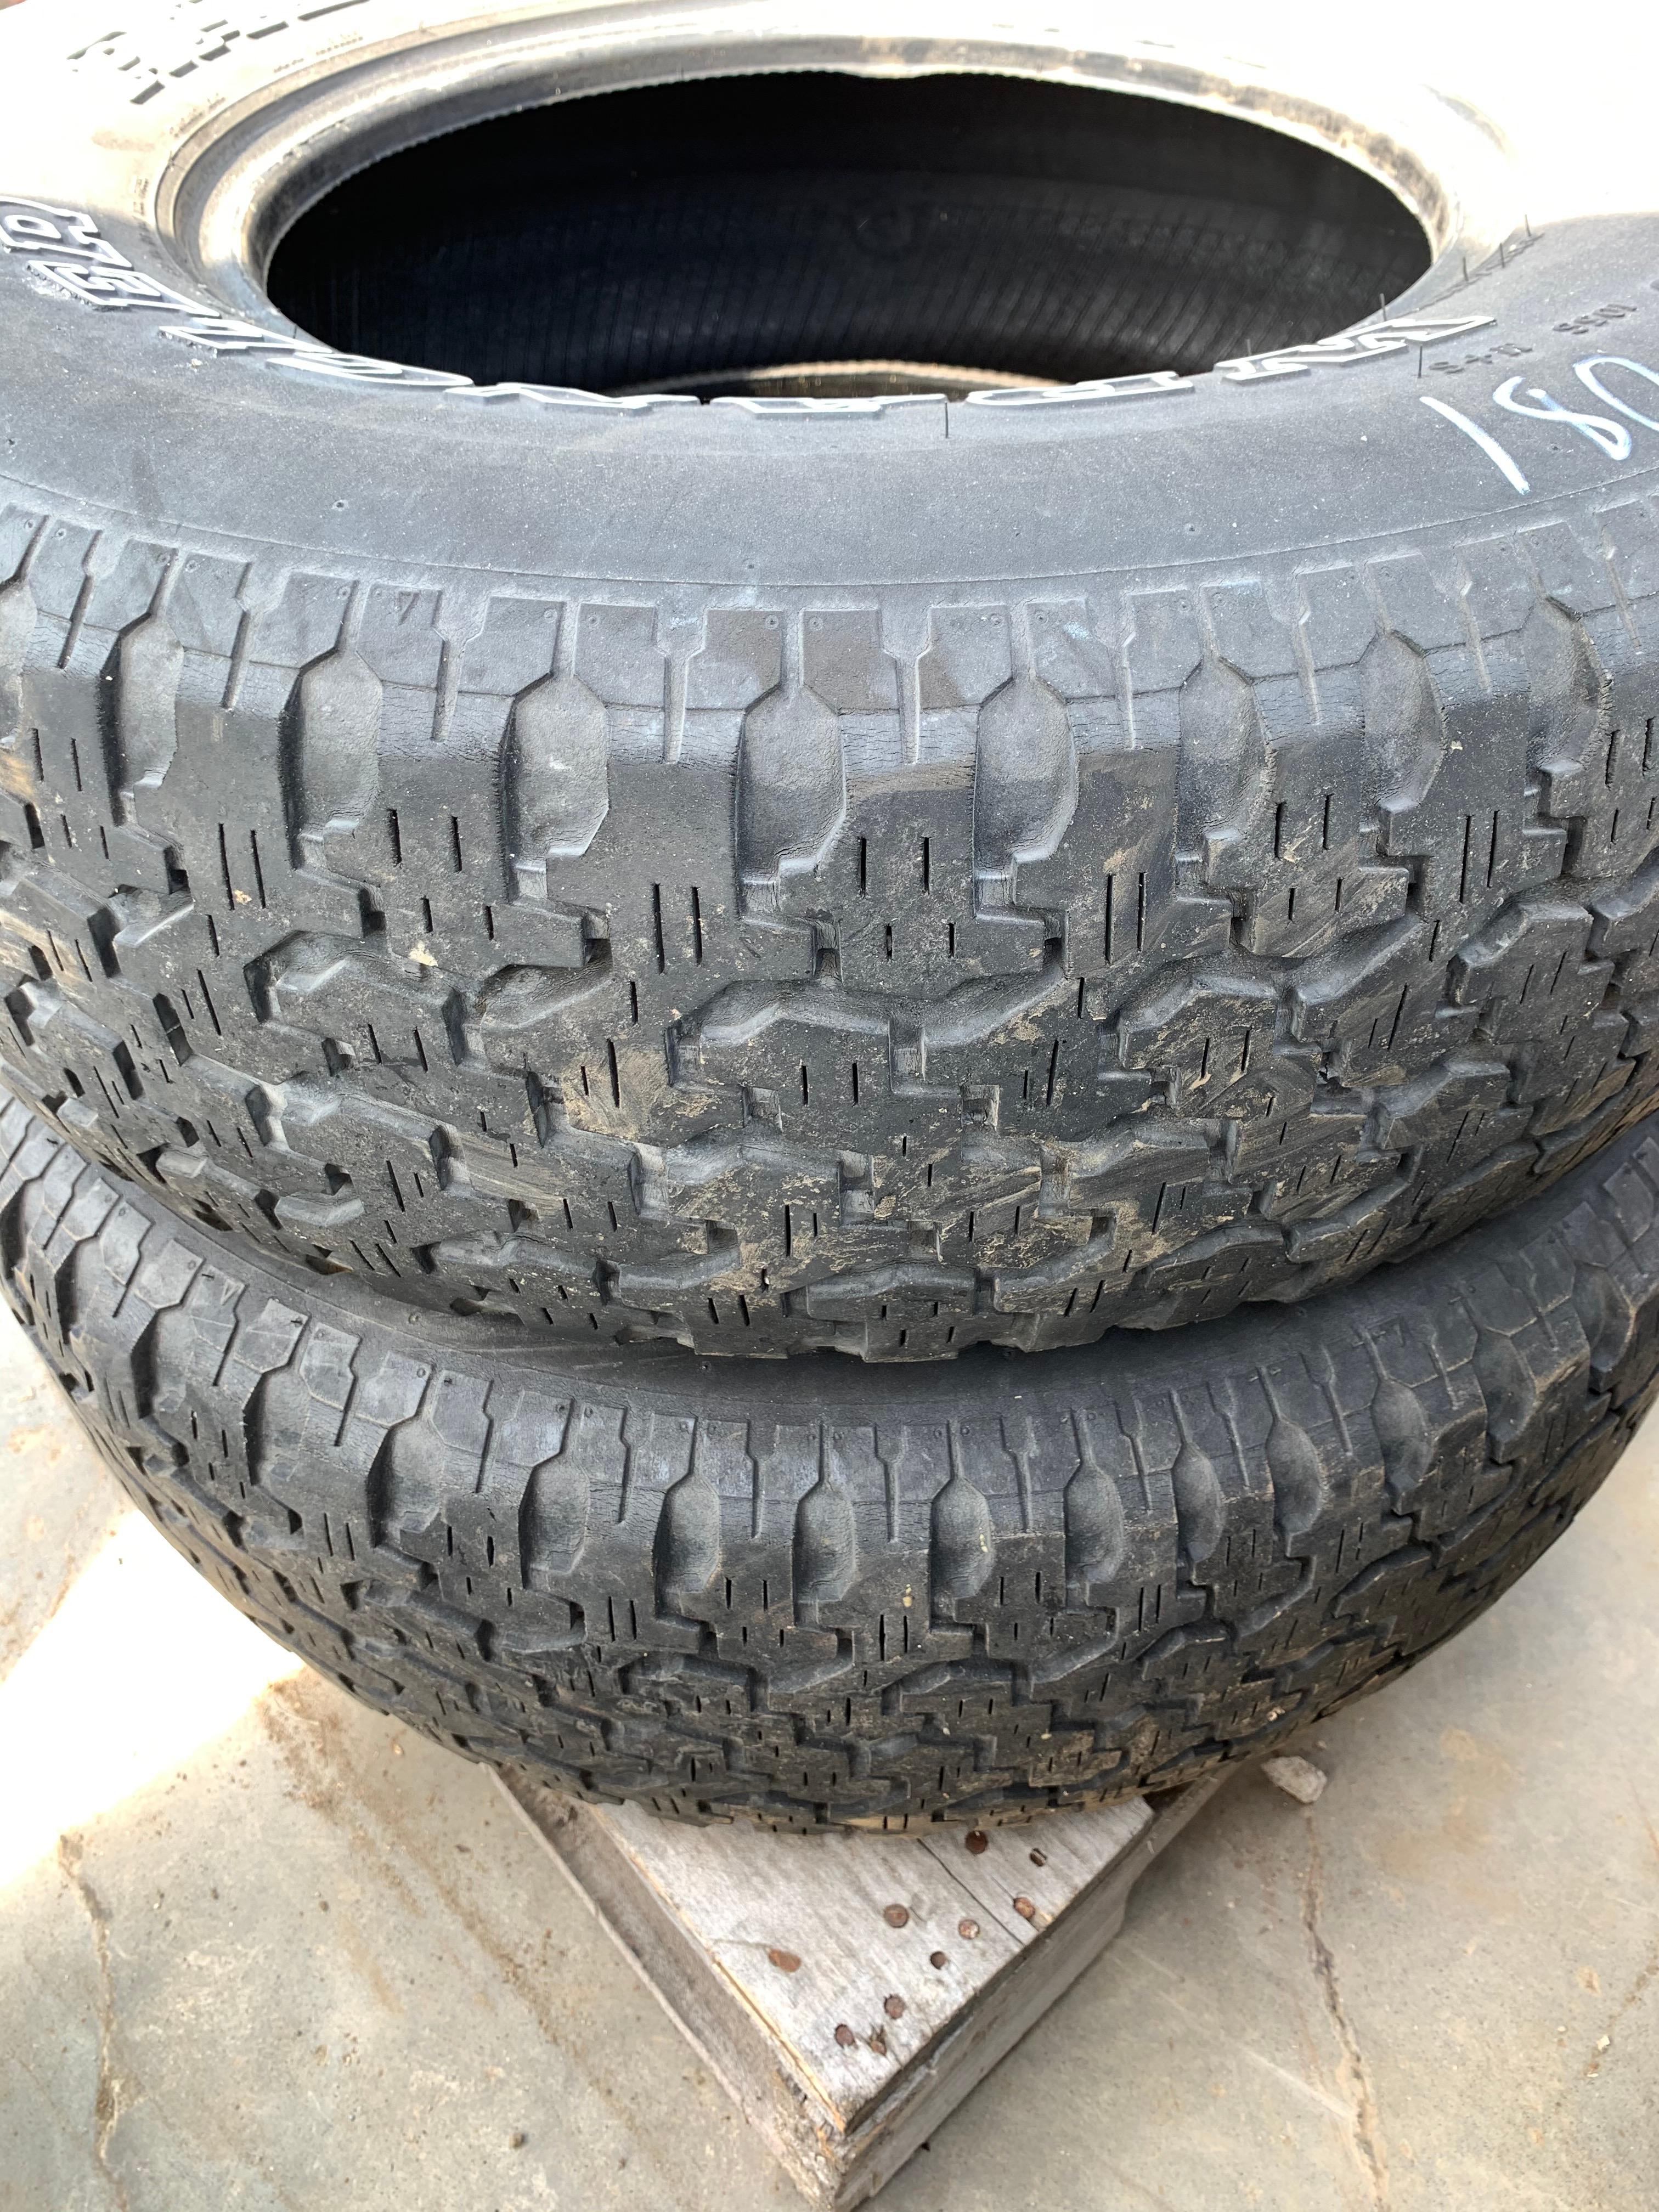 Set of 4 235/75R15 Goodyear Tires